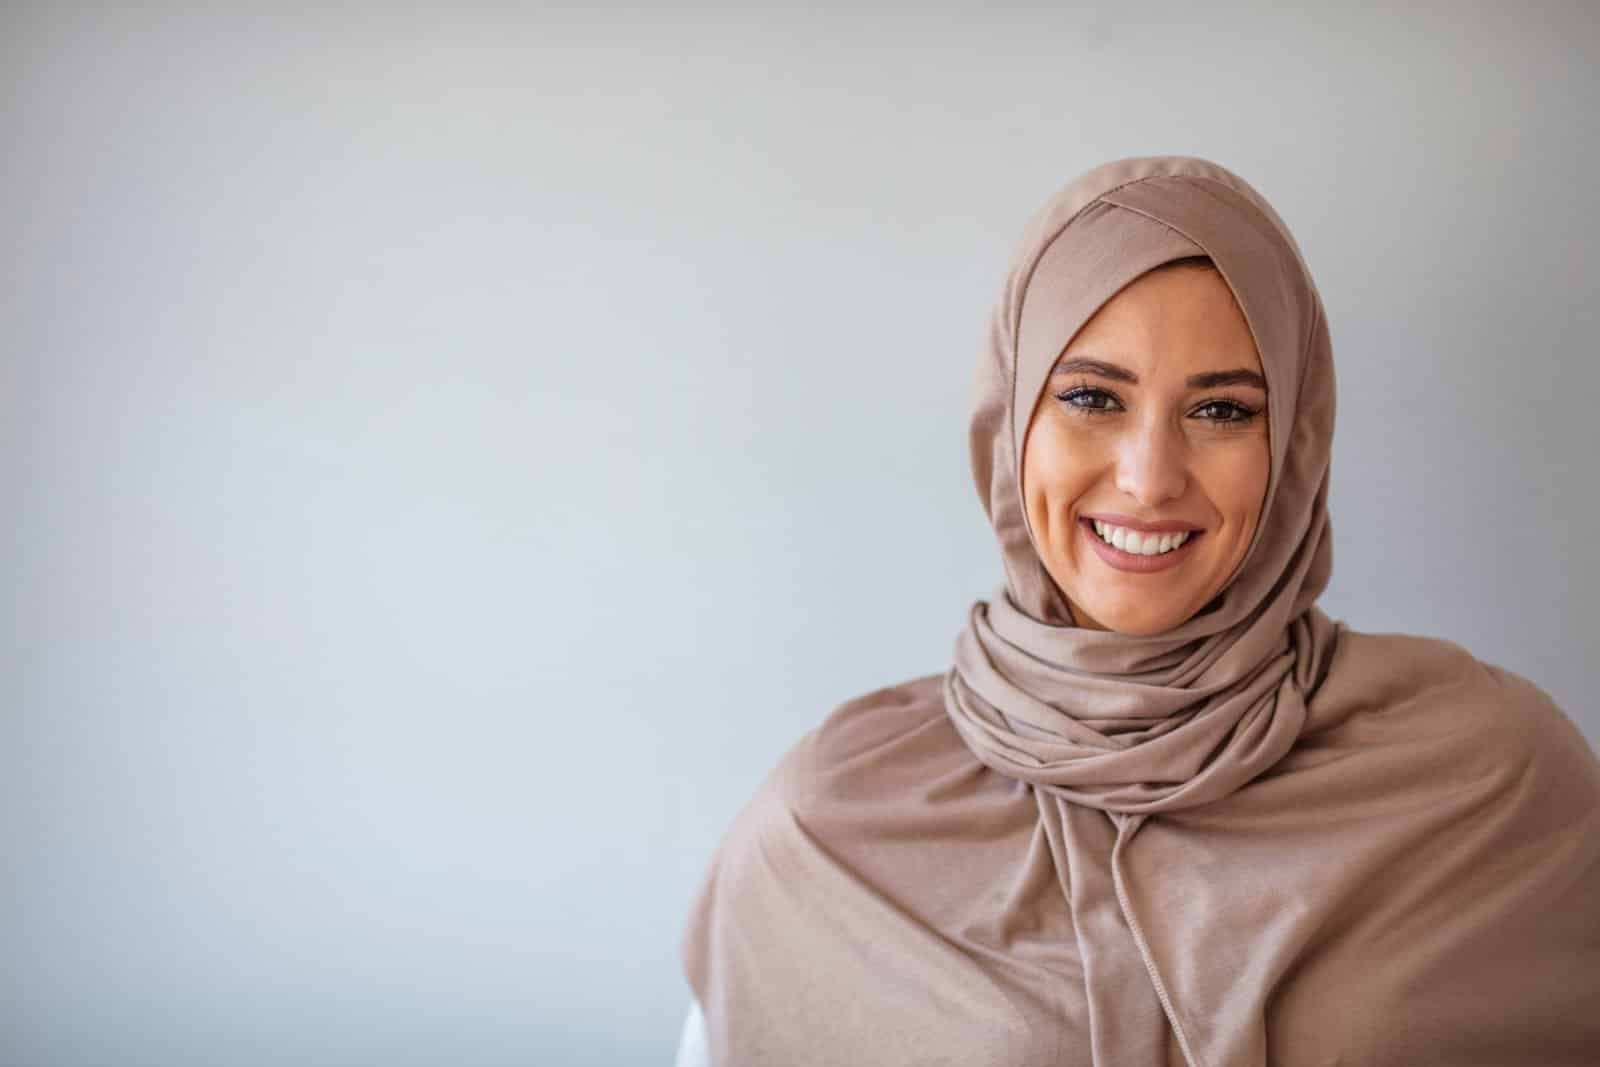 Image Credit: Shutterstock / Dragana Gordic <p>Traveling to the Middle East or parts of Africa requires awareness of local customs and dress codes to avoid offending hosts. Research and respect local traditions and laws.</p>